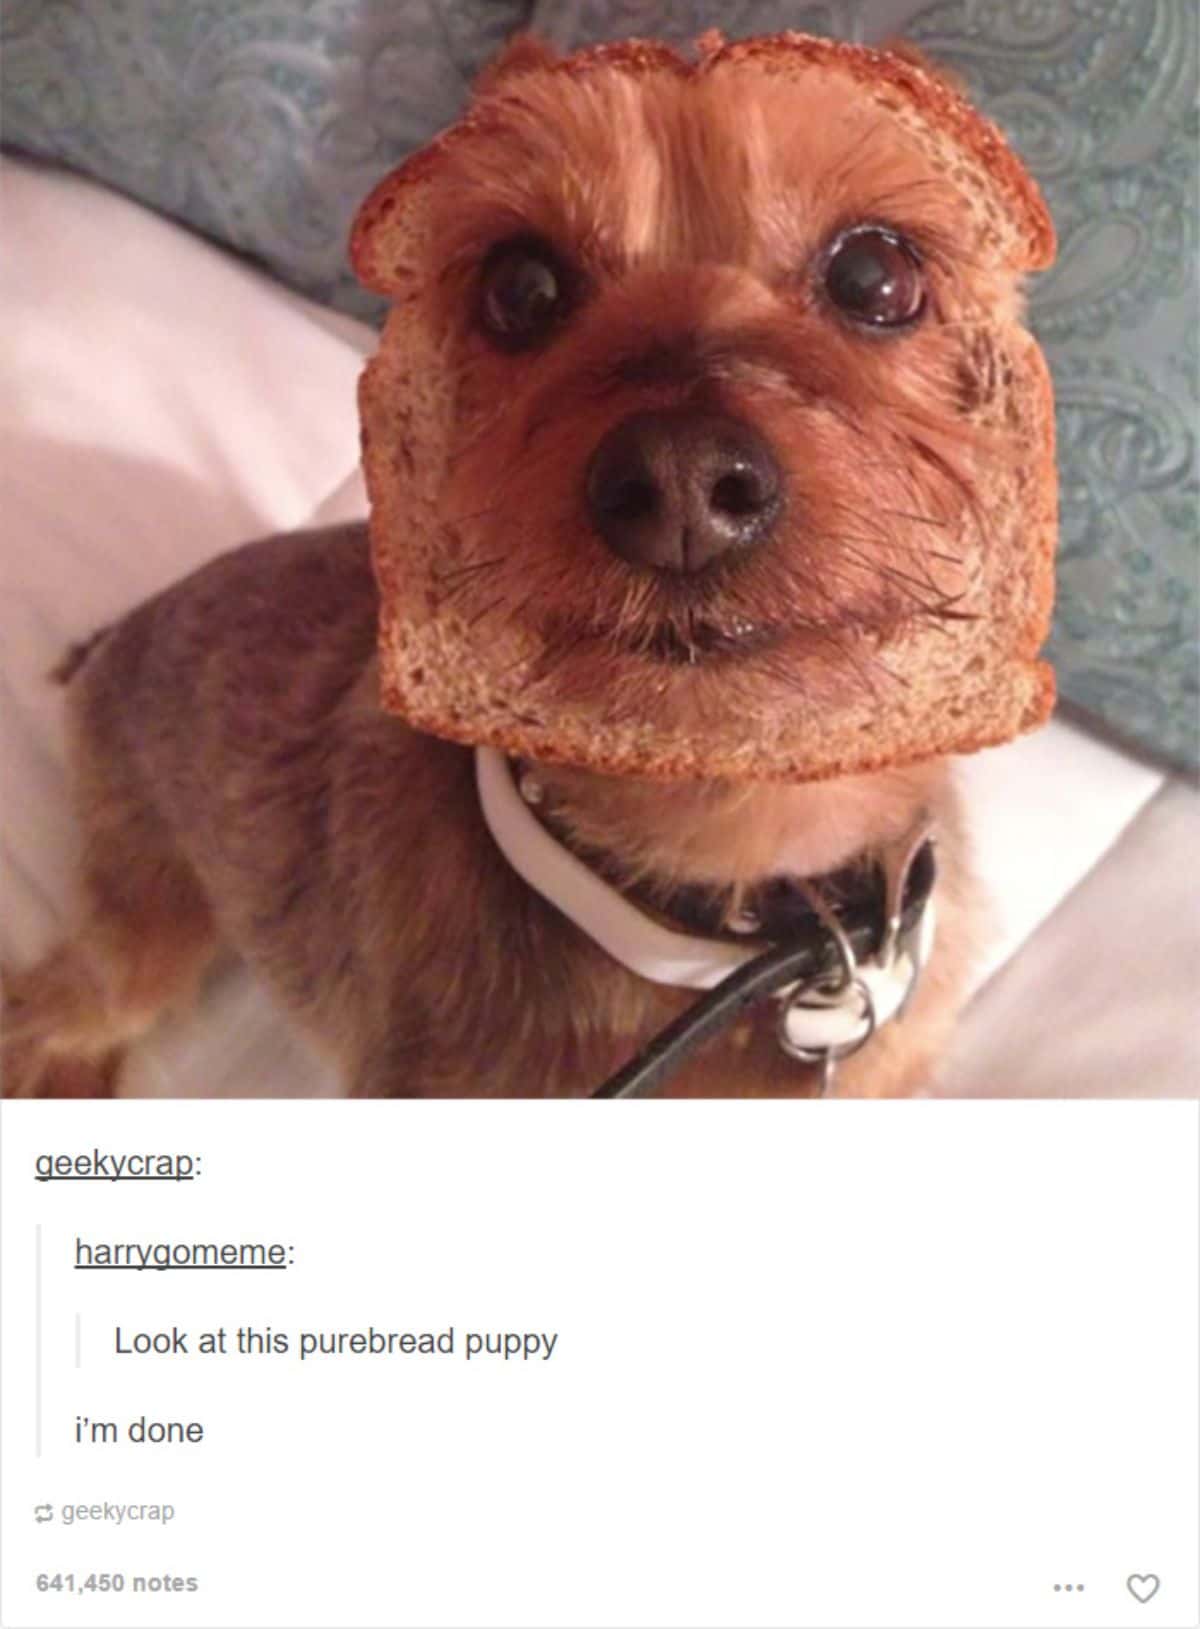 tumblr post of brown puppy with brown bread around the head and caption saying look at this purebread puppy